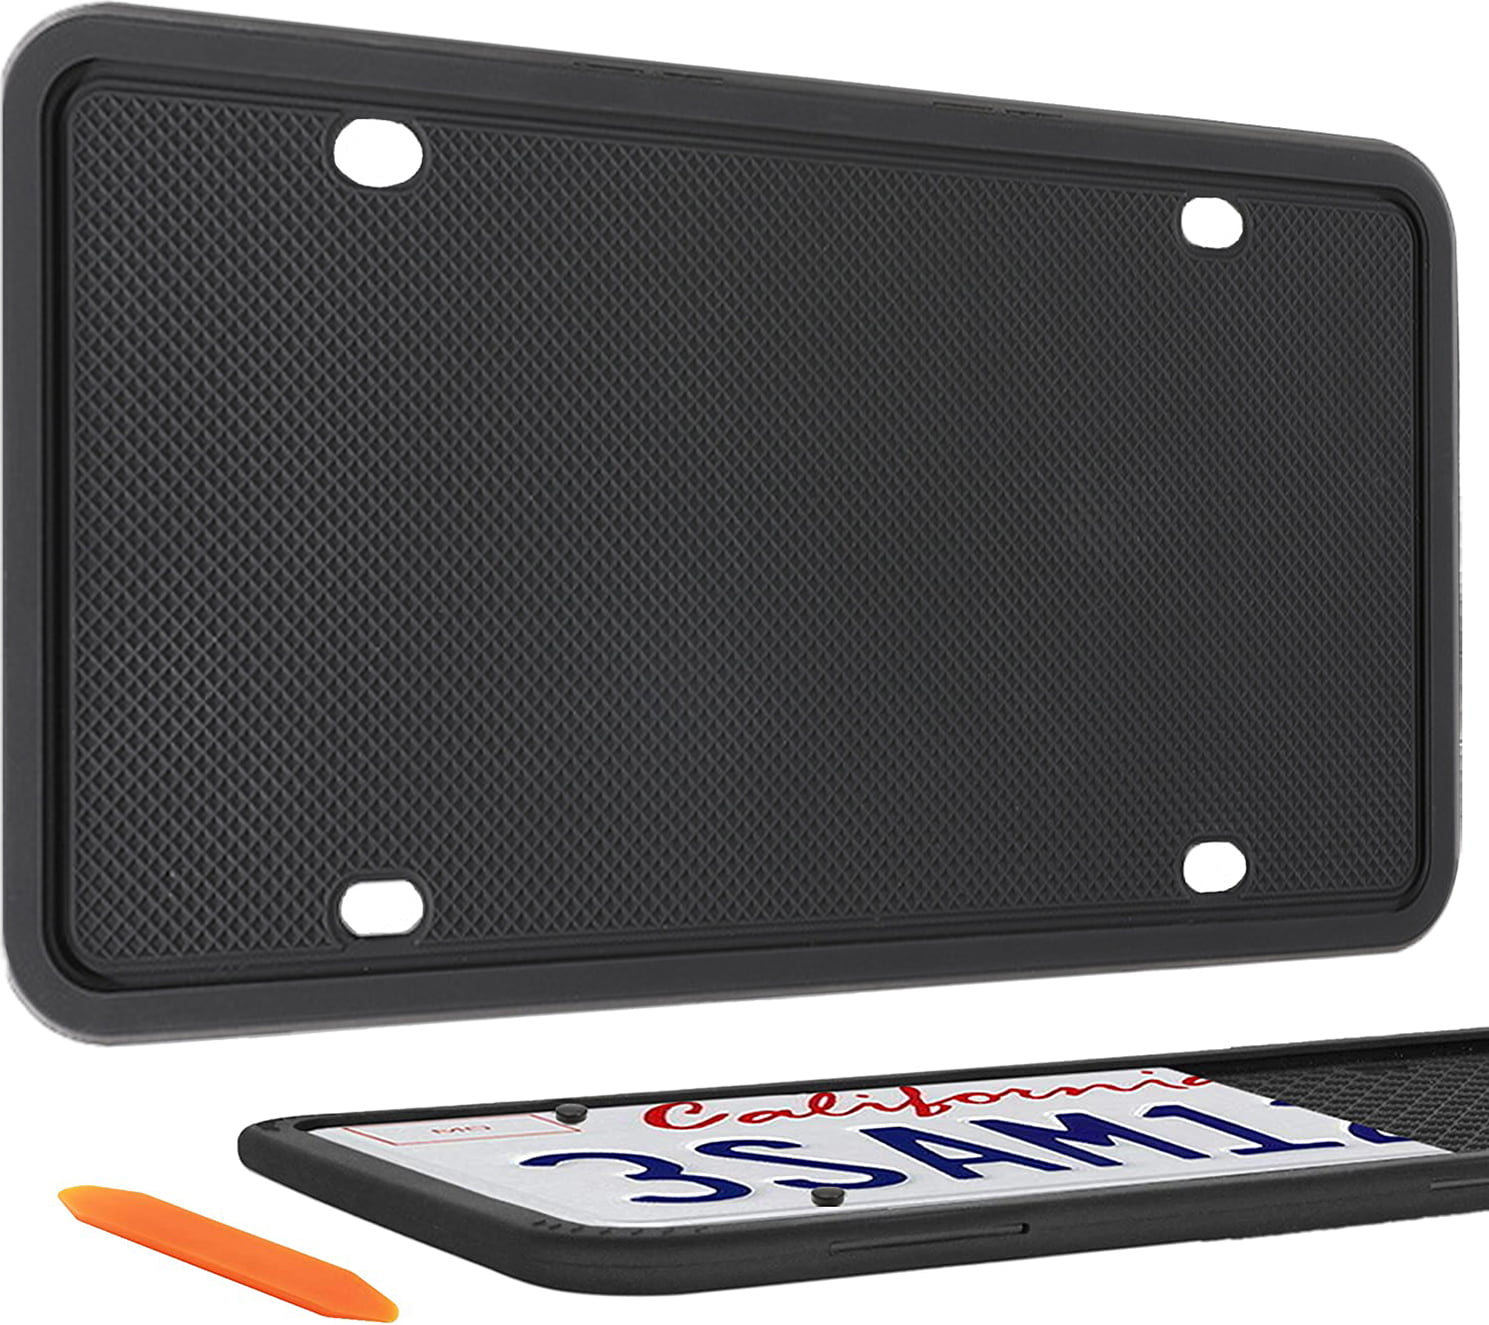 Guard-Tekk Silicone License Plate Frame Rust Proof Rattle Proof Weather Proof